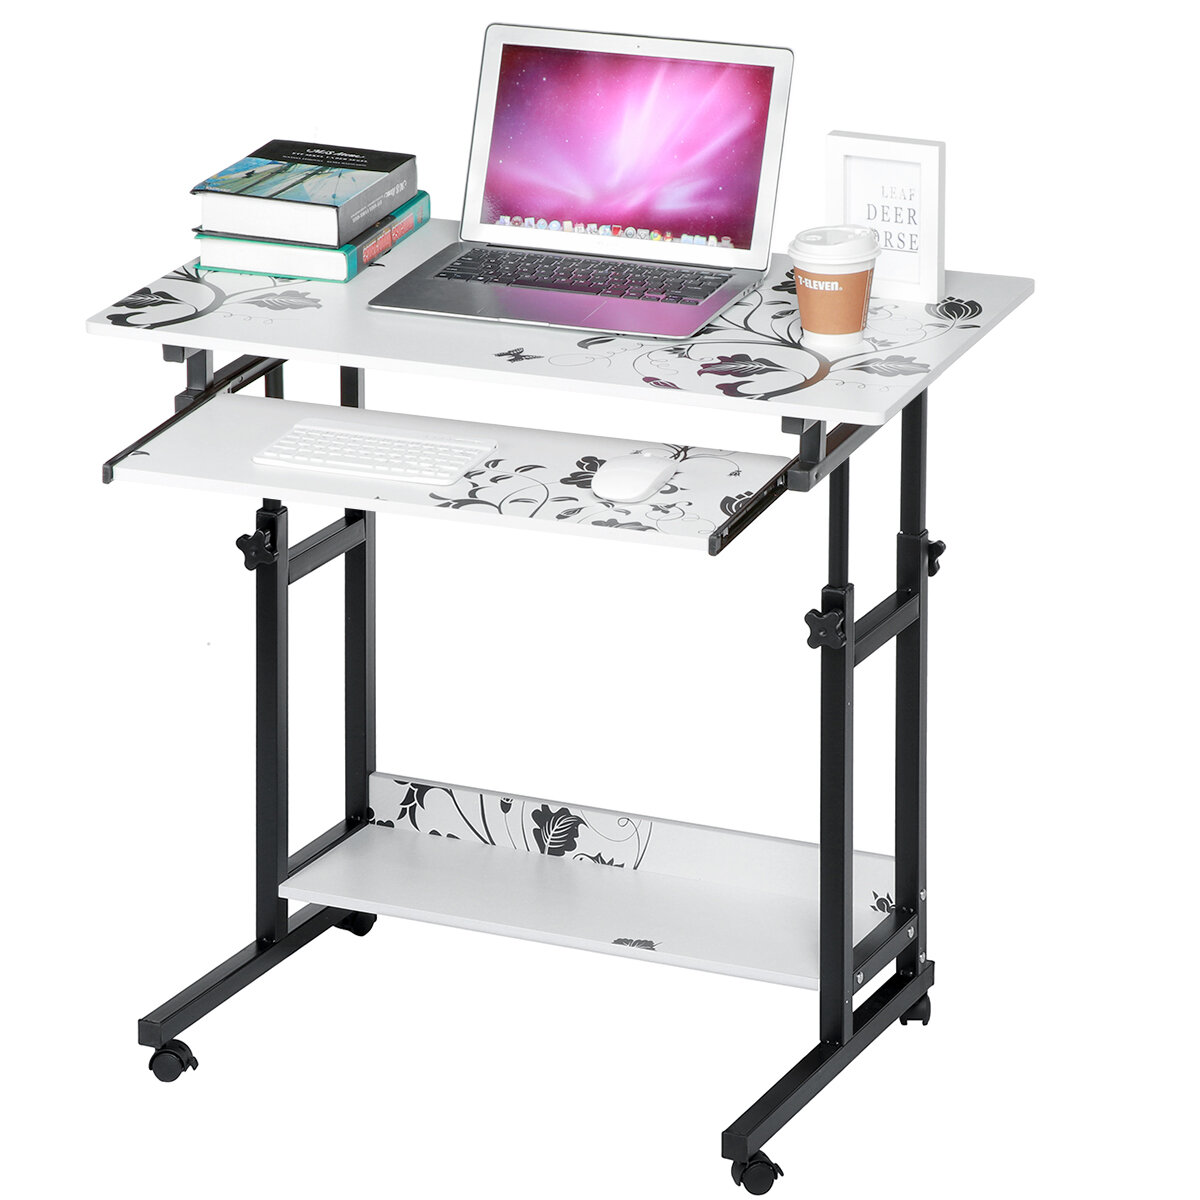 2 Layers Mobile Laptop Desk Cart Rolling Notebook Computer Stand Height Adjustable Bedside Table with Keyboard Tray Whee